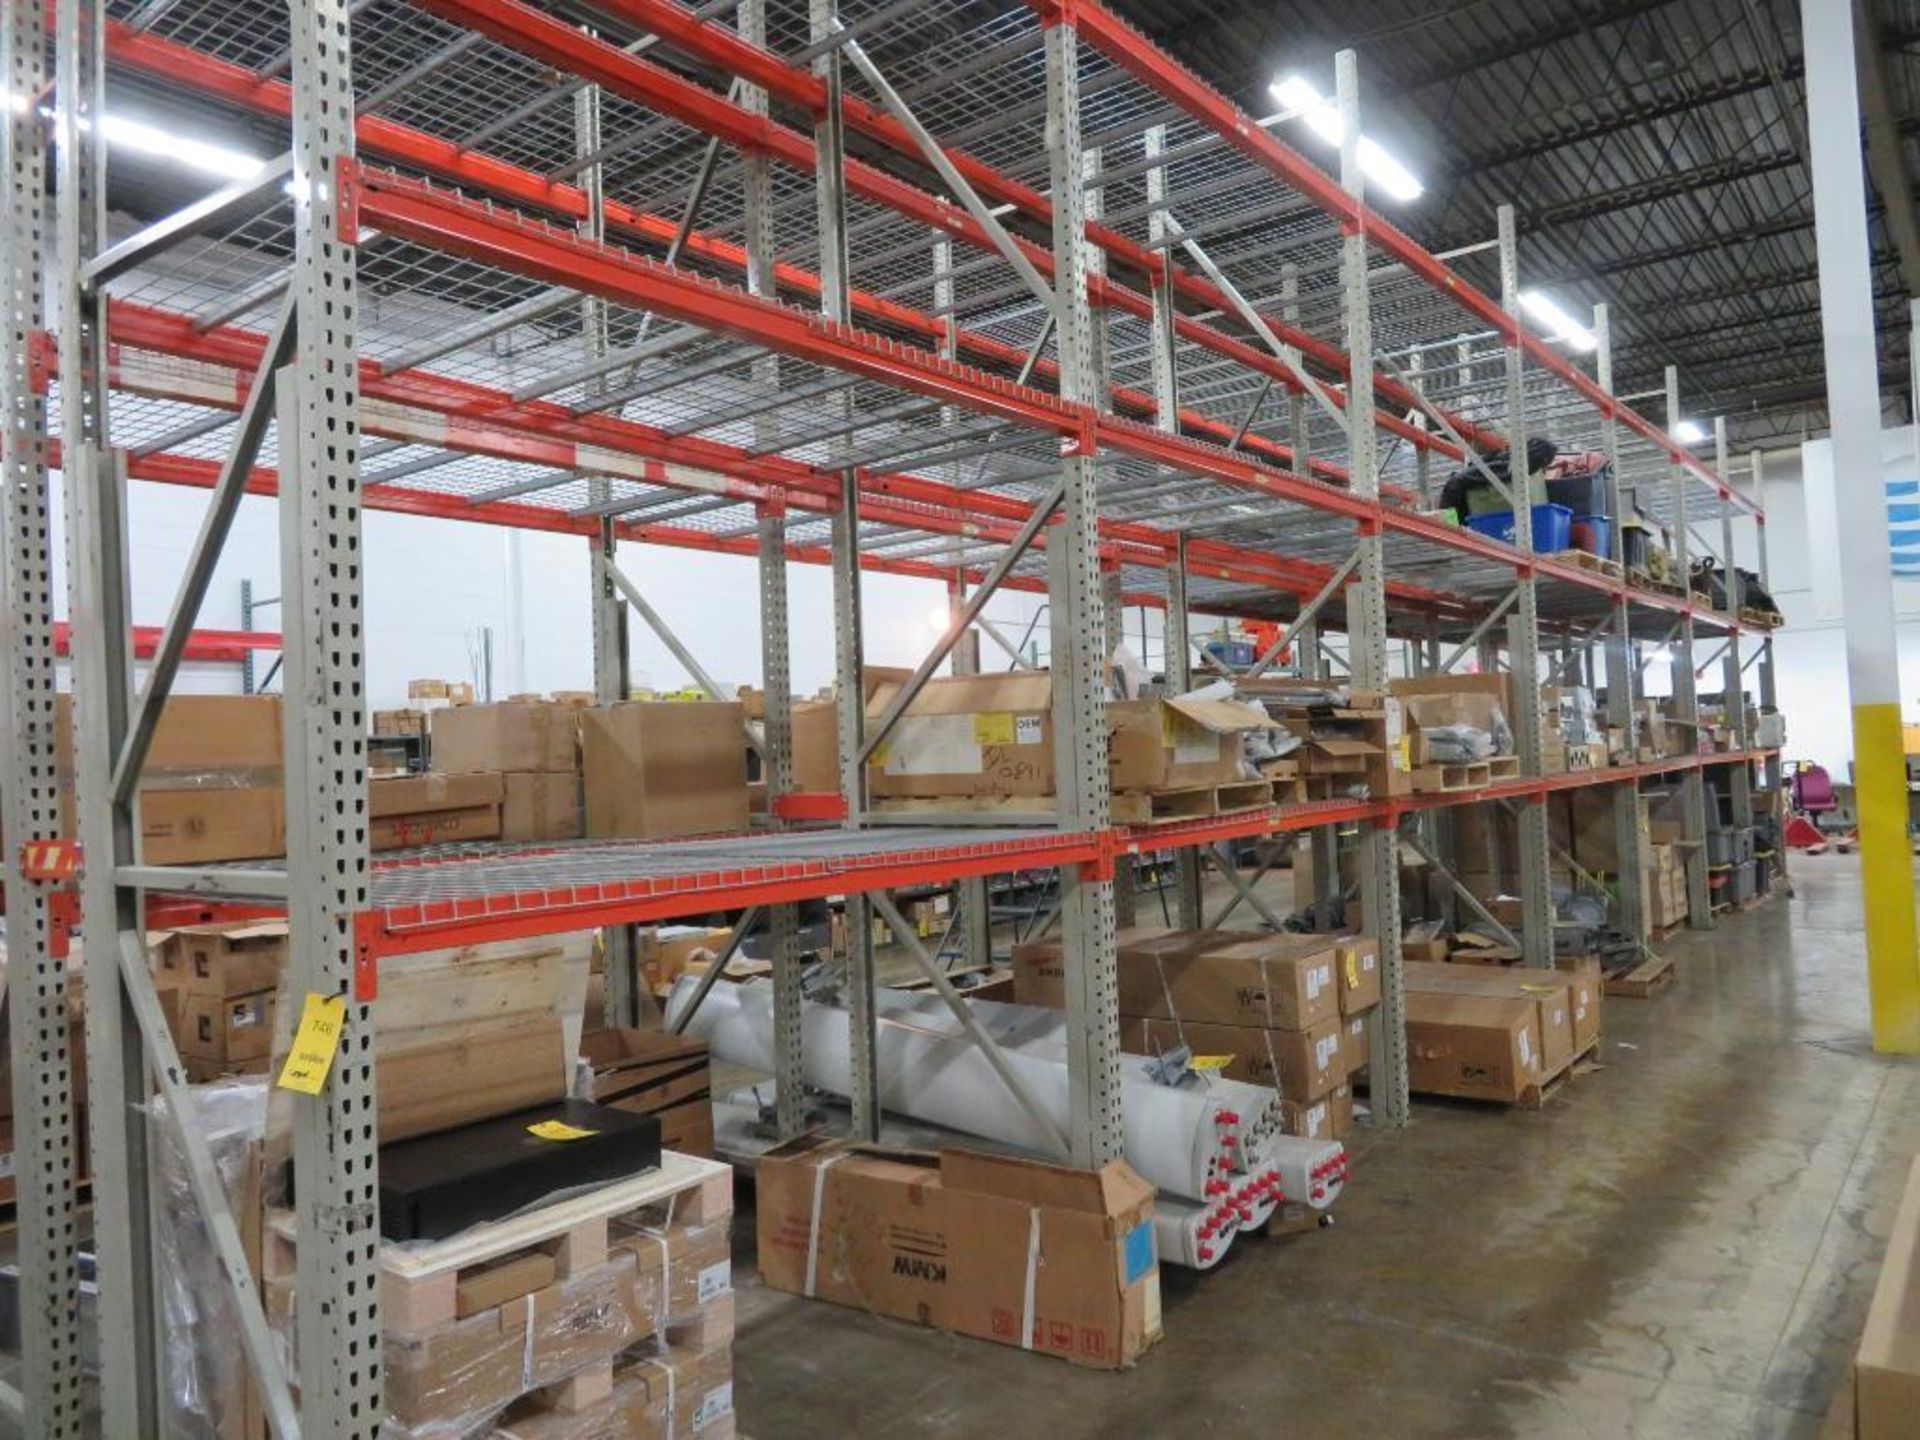 LOT: (7) Sections 15 ft. x 8 ft. x 42 in. 3-Tier Pallet Rack, with Wire Decking (no contents,